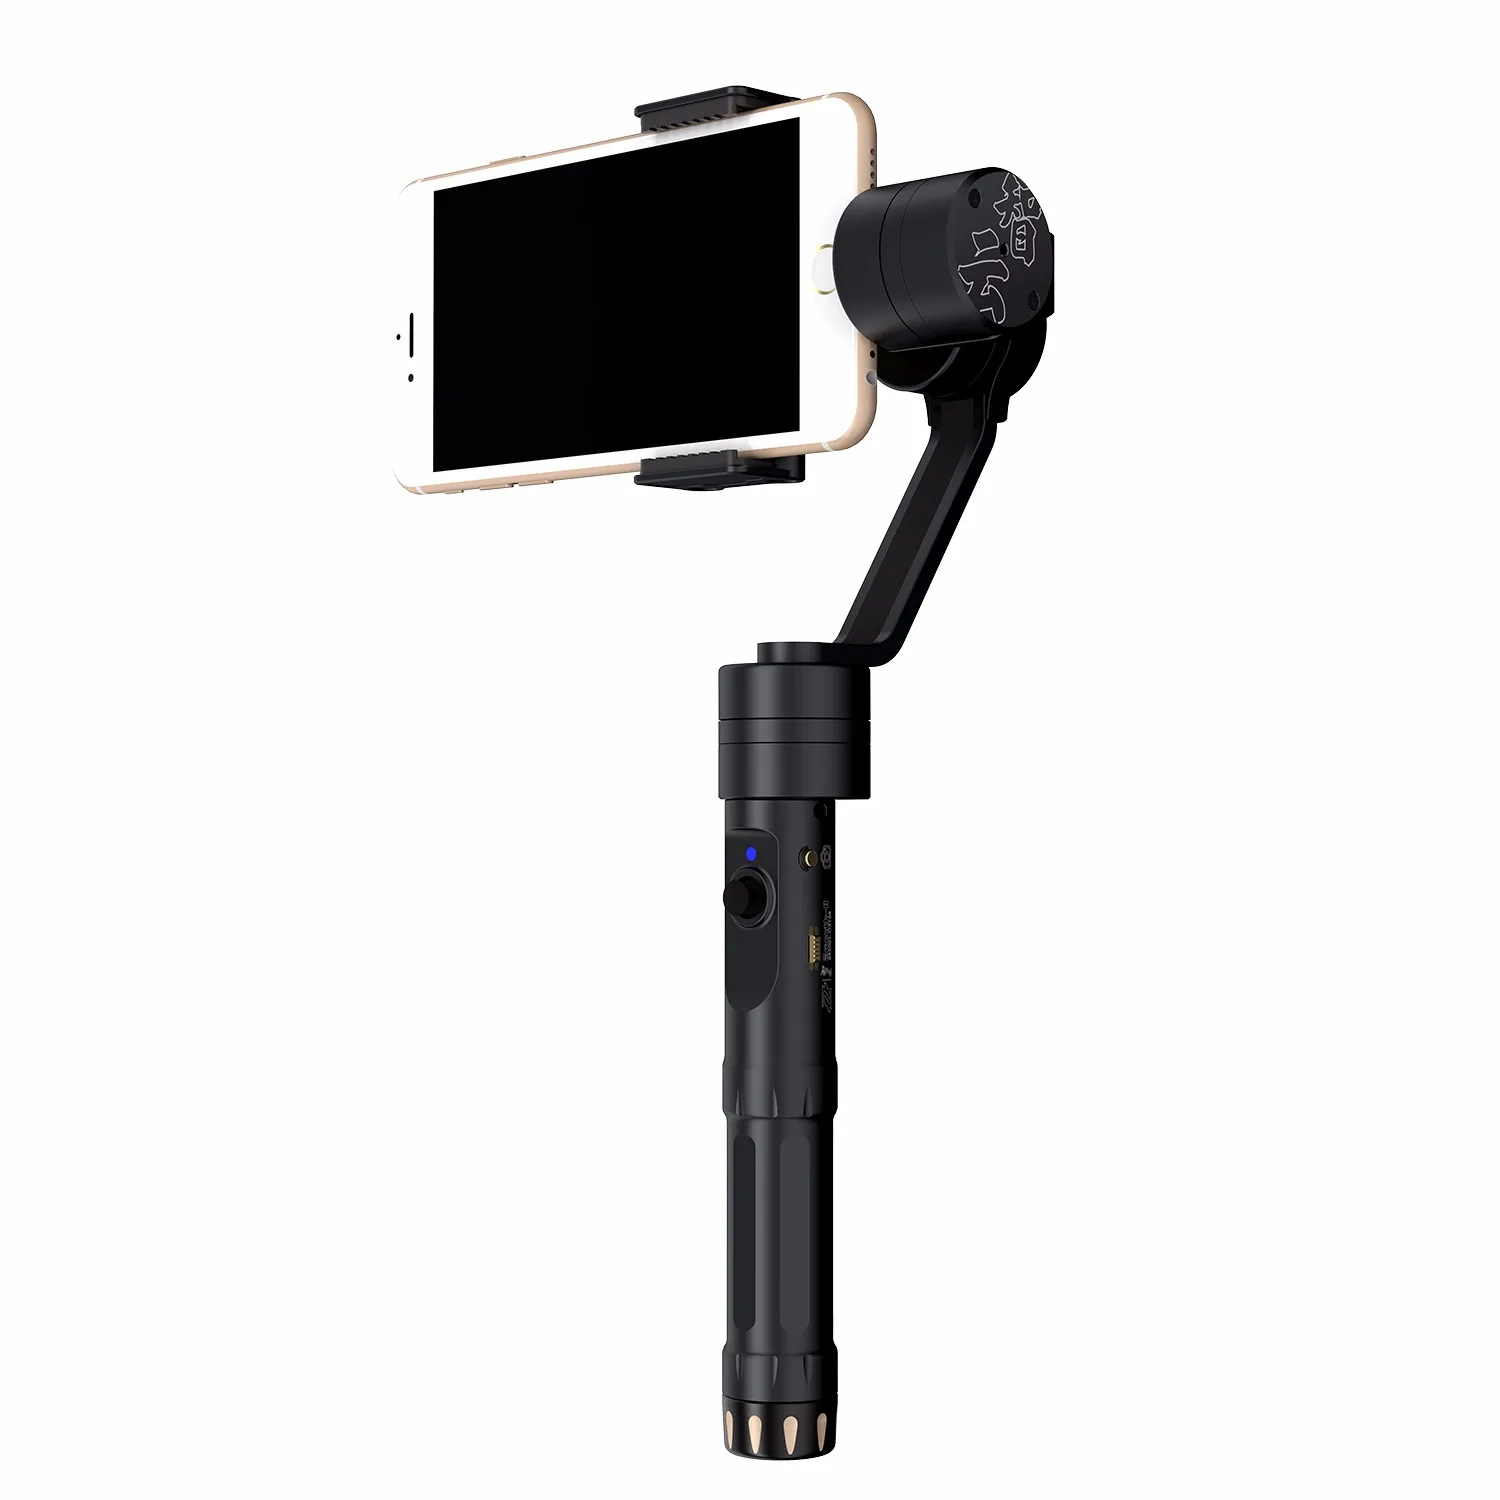 

Zhiyun Z1 Smooth II 2 Multi-function 3-Axis Handheld Steady Gimbal Supports Phone Camera Wireless Controller for iPhone 7 plus